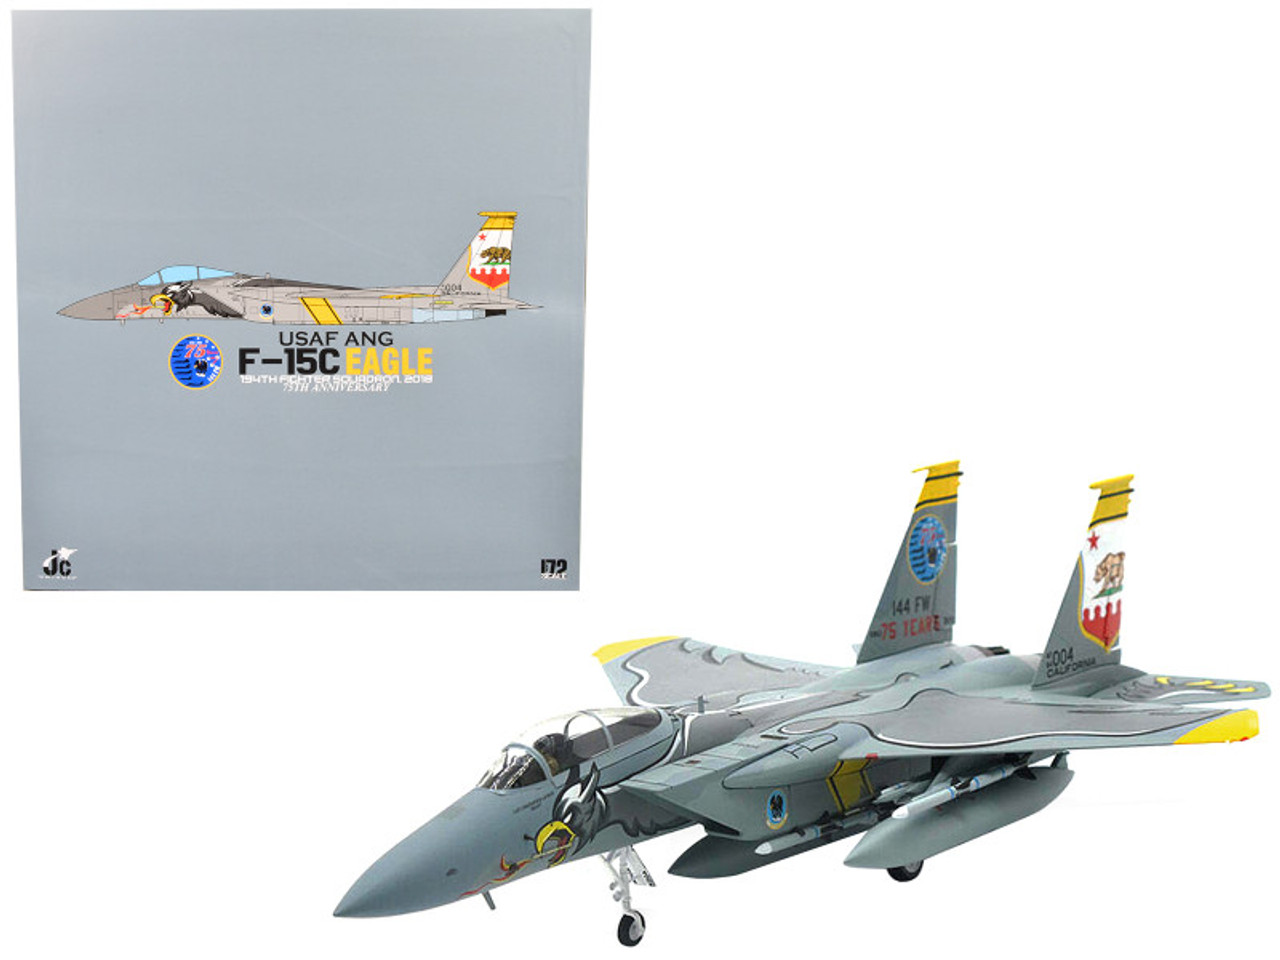 McDonnell Douglas F-15C Eagle Fighter Aircraft 004 California "USAF ANG 194th Fighter Squadron 75th Anniversary Edition" (2018) 1/72 Diecast Model by JC Wings